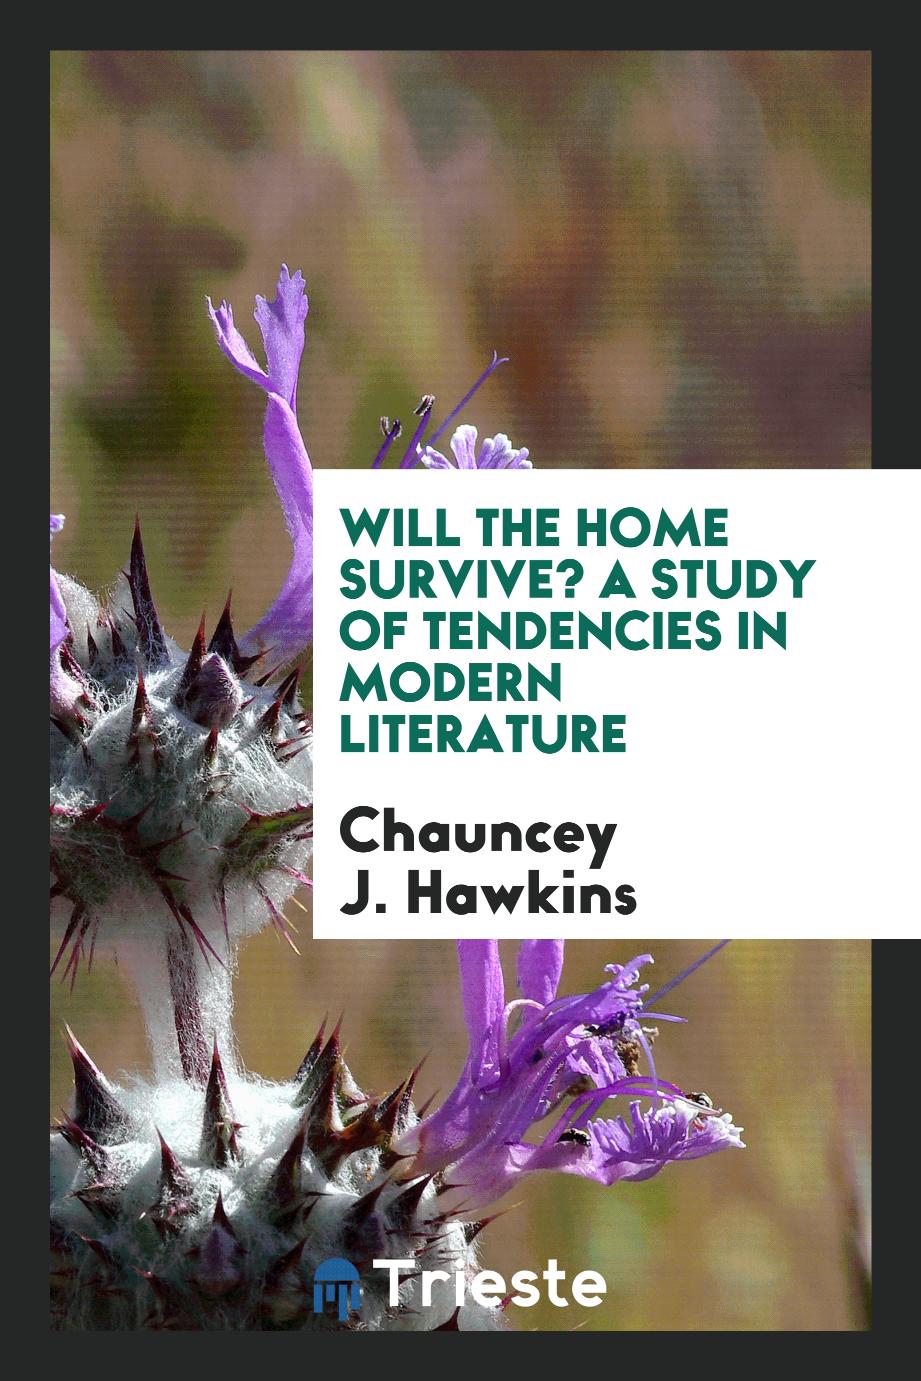 Will the home survive? A study of tendencies in modern literature